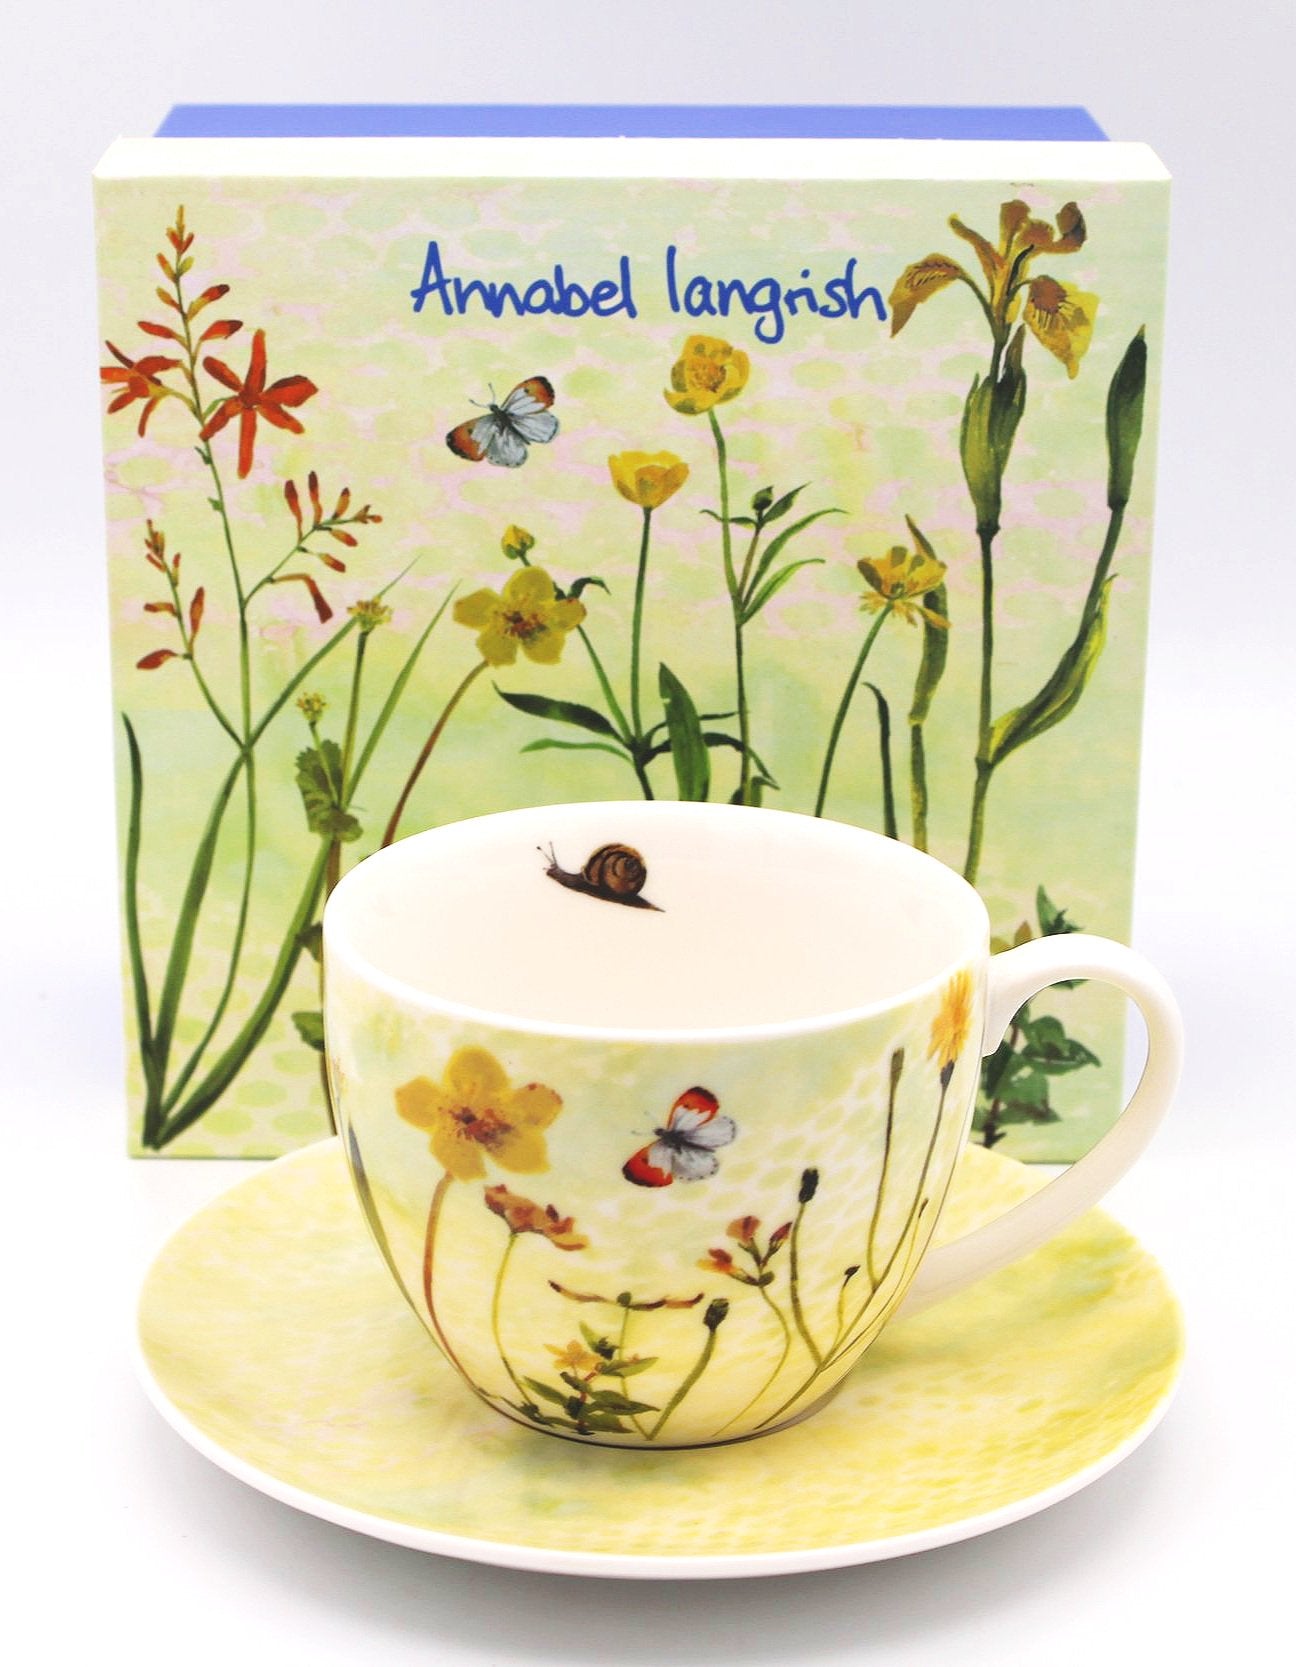 Annabel Langrish Cappuccino Cup and Saucer Gift Set in Yellow